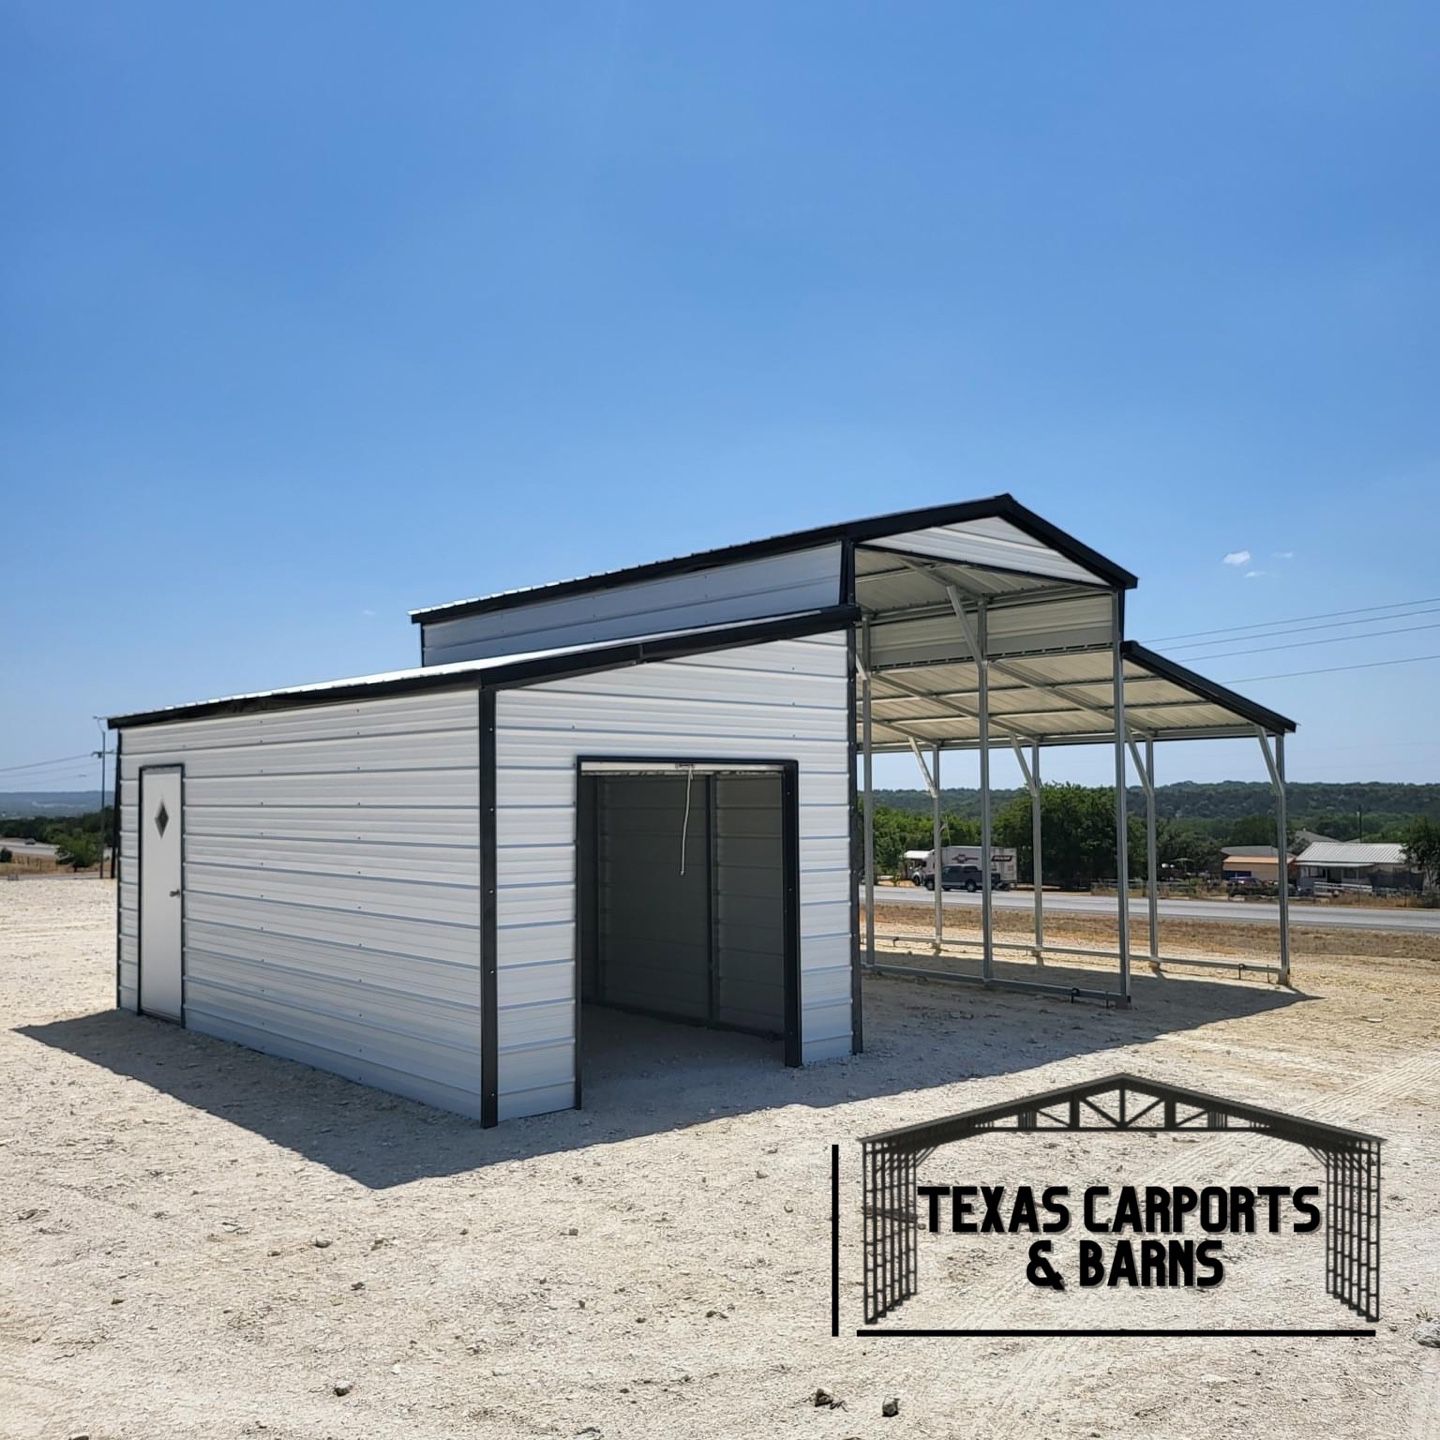 Carports , Garages , Rv/Boat Covers , Barns , Commercial / Residencial Buildings